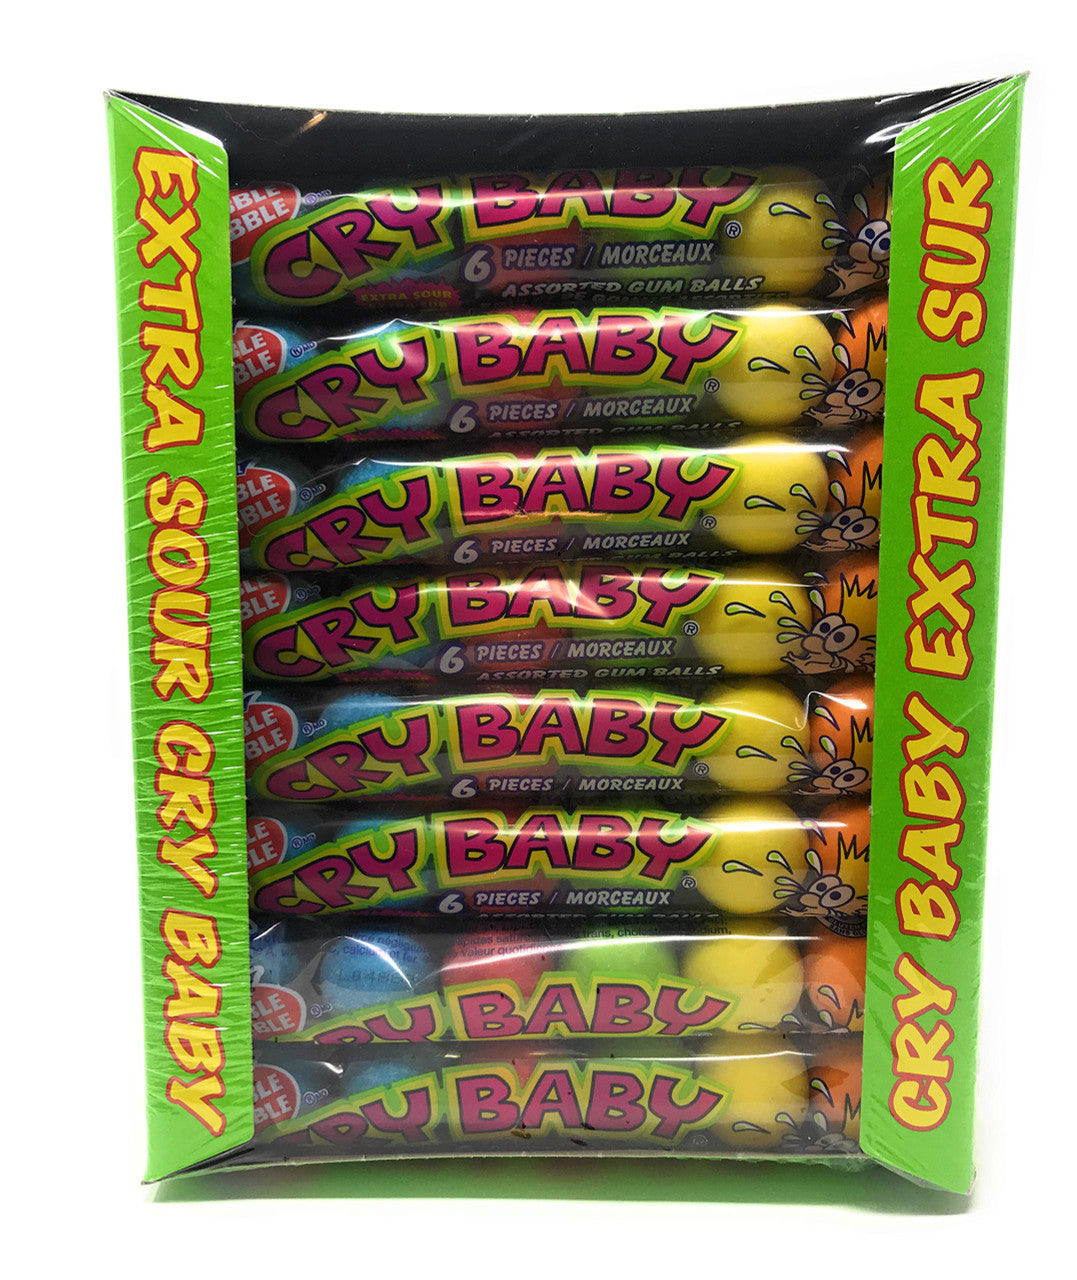 Original Dubble Bubble - Extra Sour Cry Baby - Assorted Gum Balls - 24 Packs of 6 Large Gumballs - 1.58kg/3.5 lbs